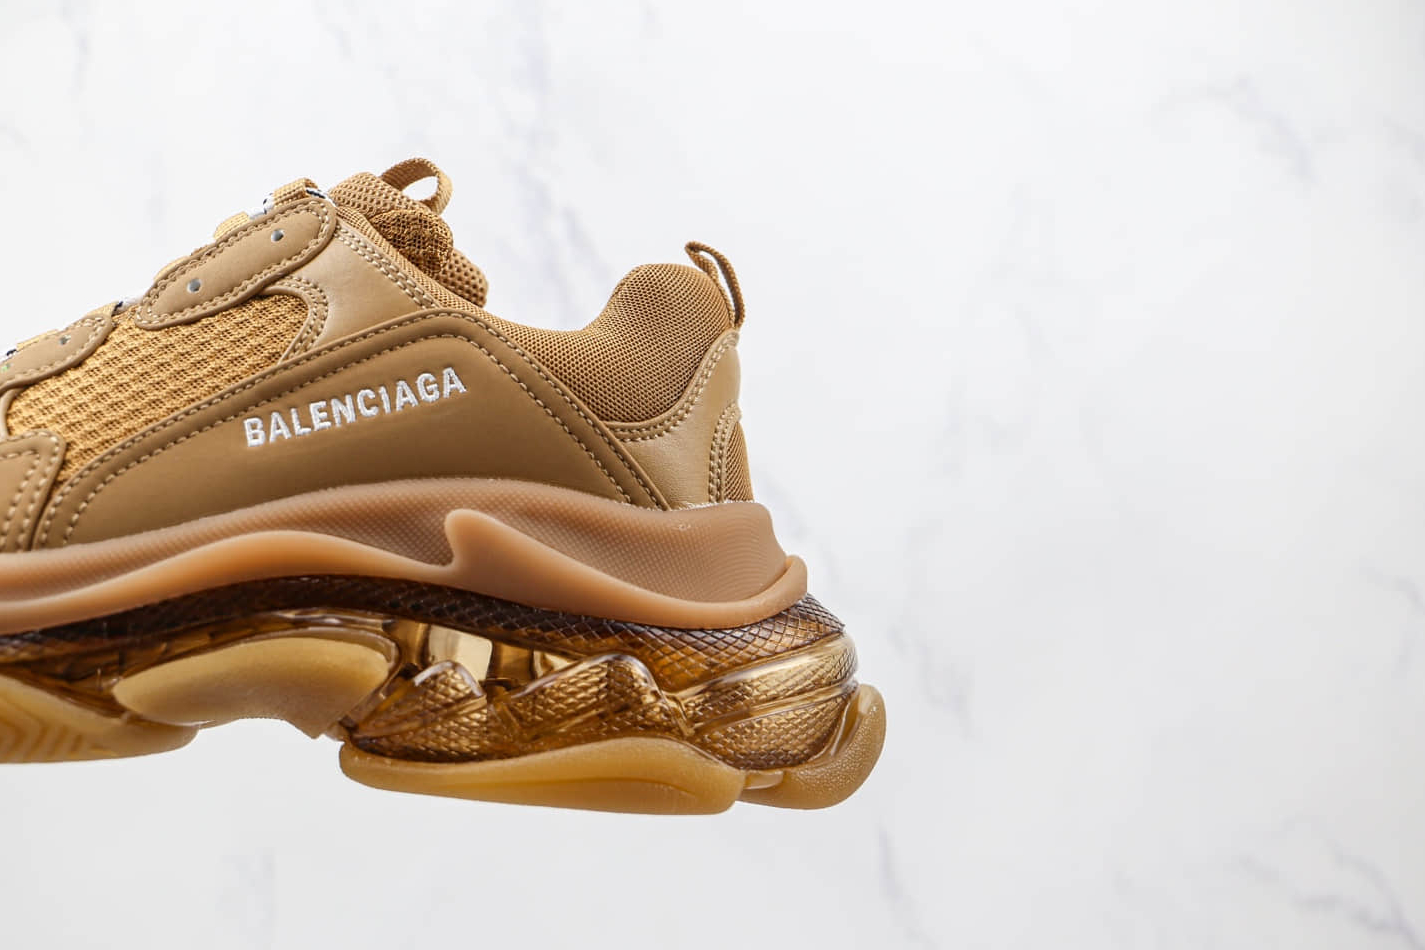 Balenciaga Triple S 'Clear Sole - Light Camel' 544351 W2GA1 2706 - Exquisite Sneakers for the Fashion Forward